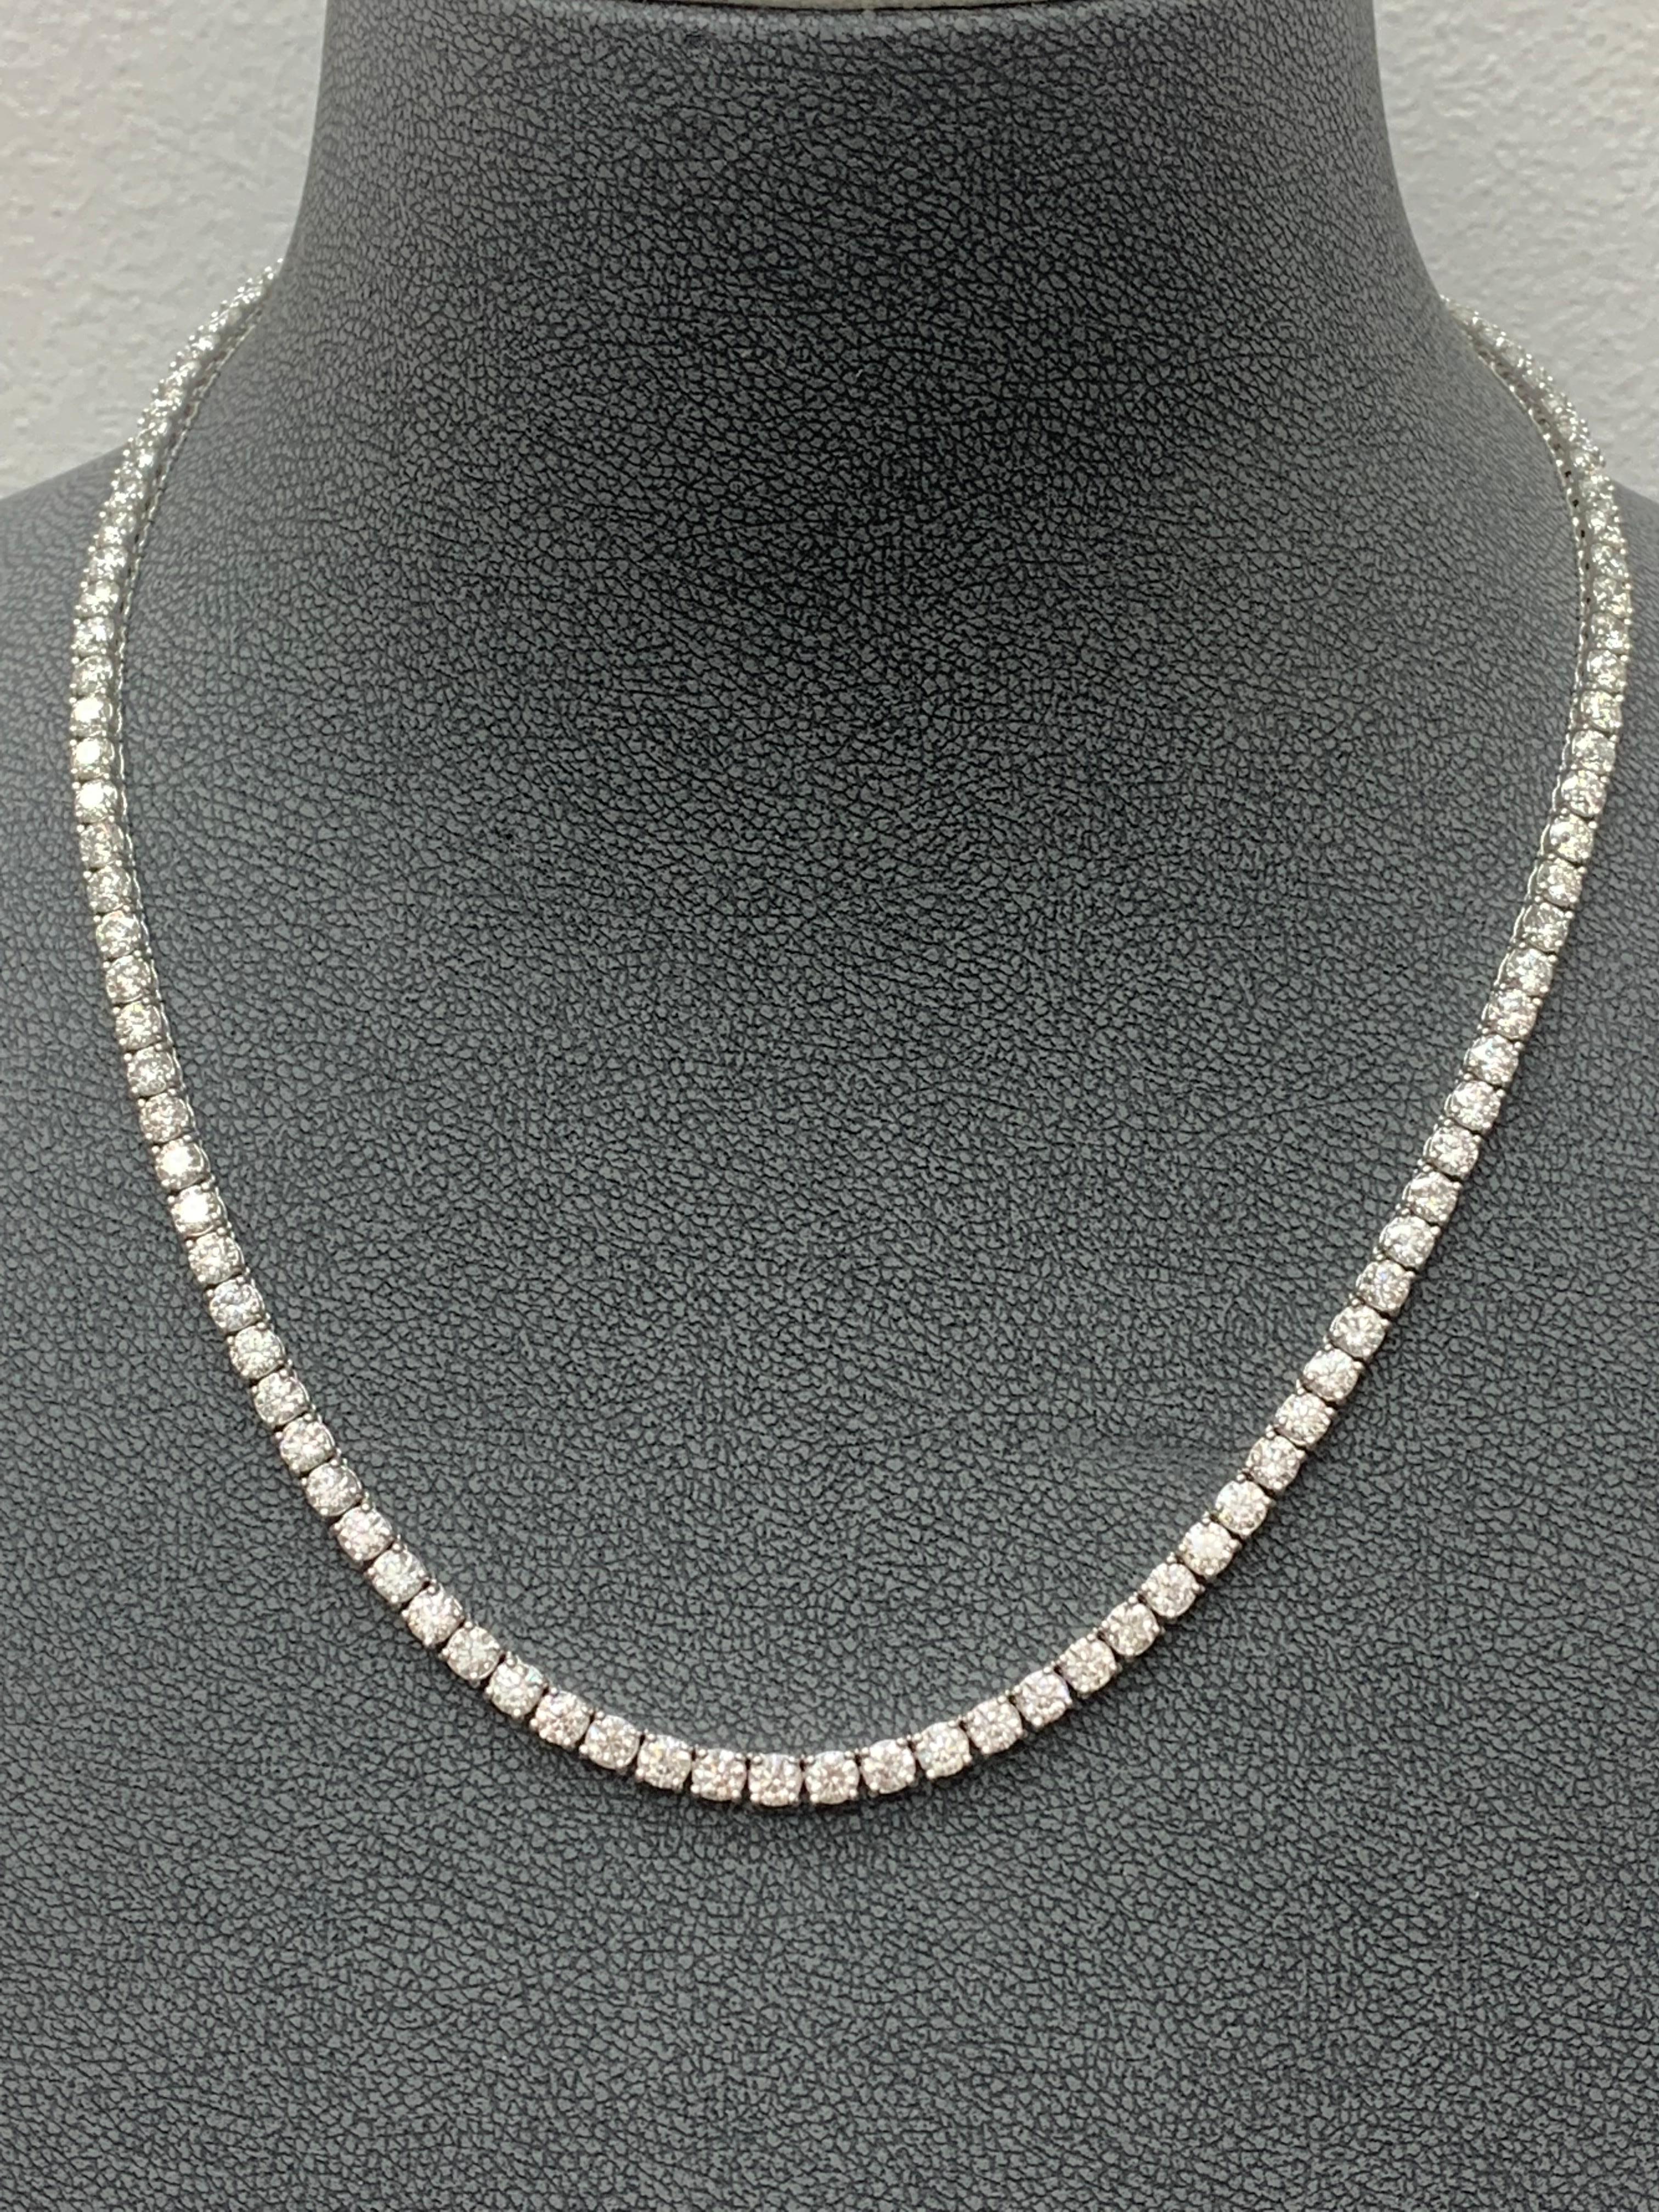 Modern 17.21 Carat Diamond Tennis Necklace in 14K White Gold For Sale